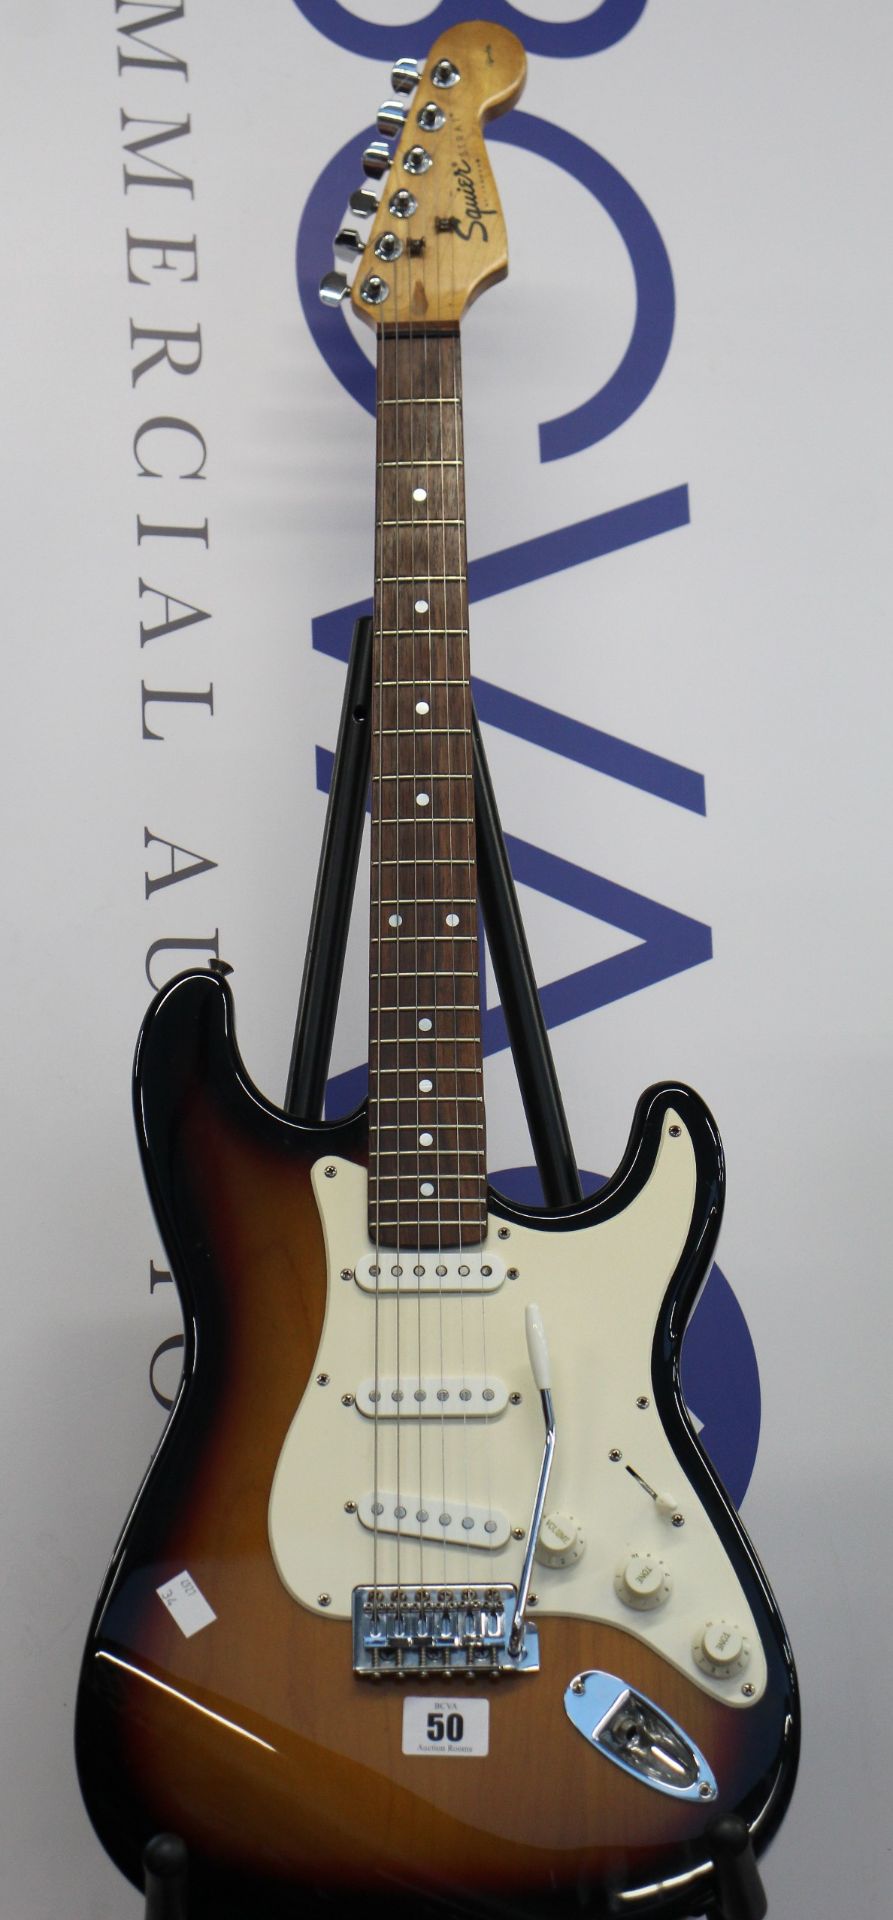 A pre-owned Fender Affinity Series Stratocaster electric guitar.